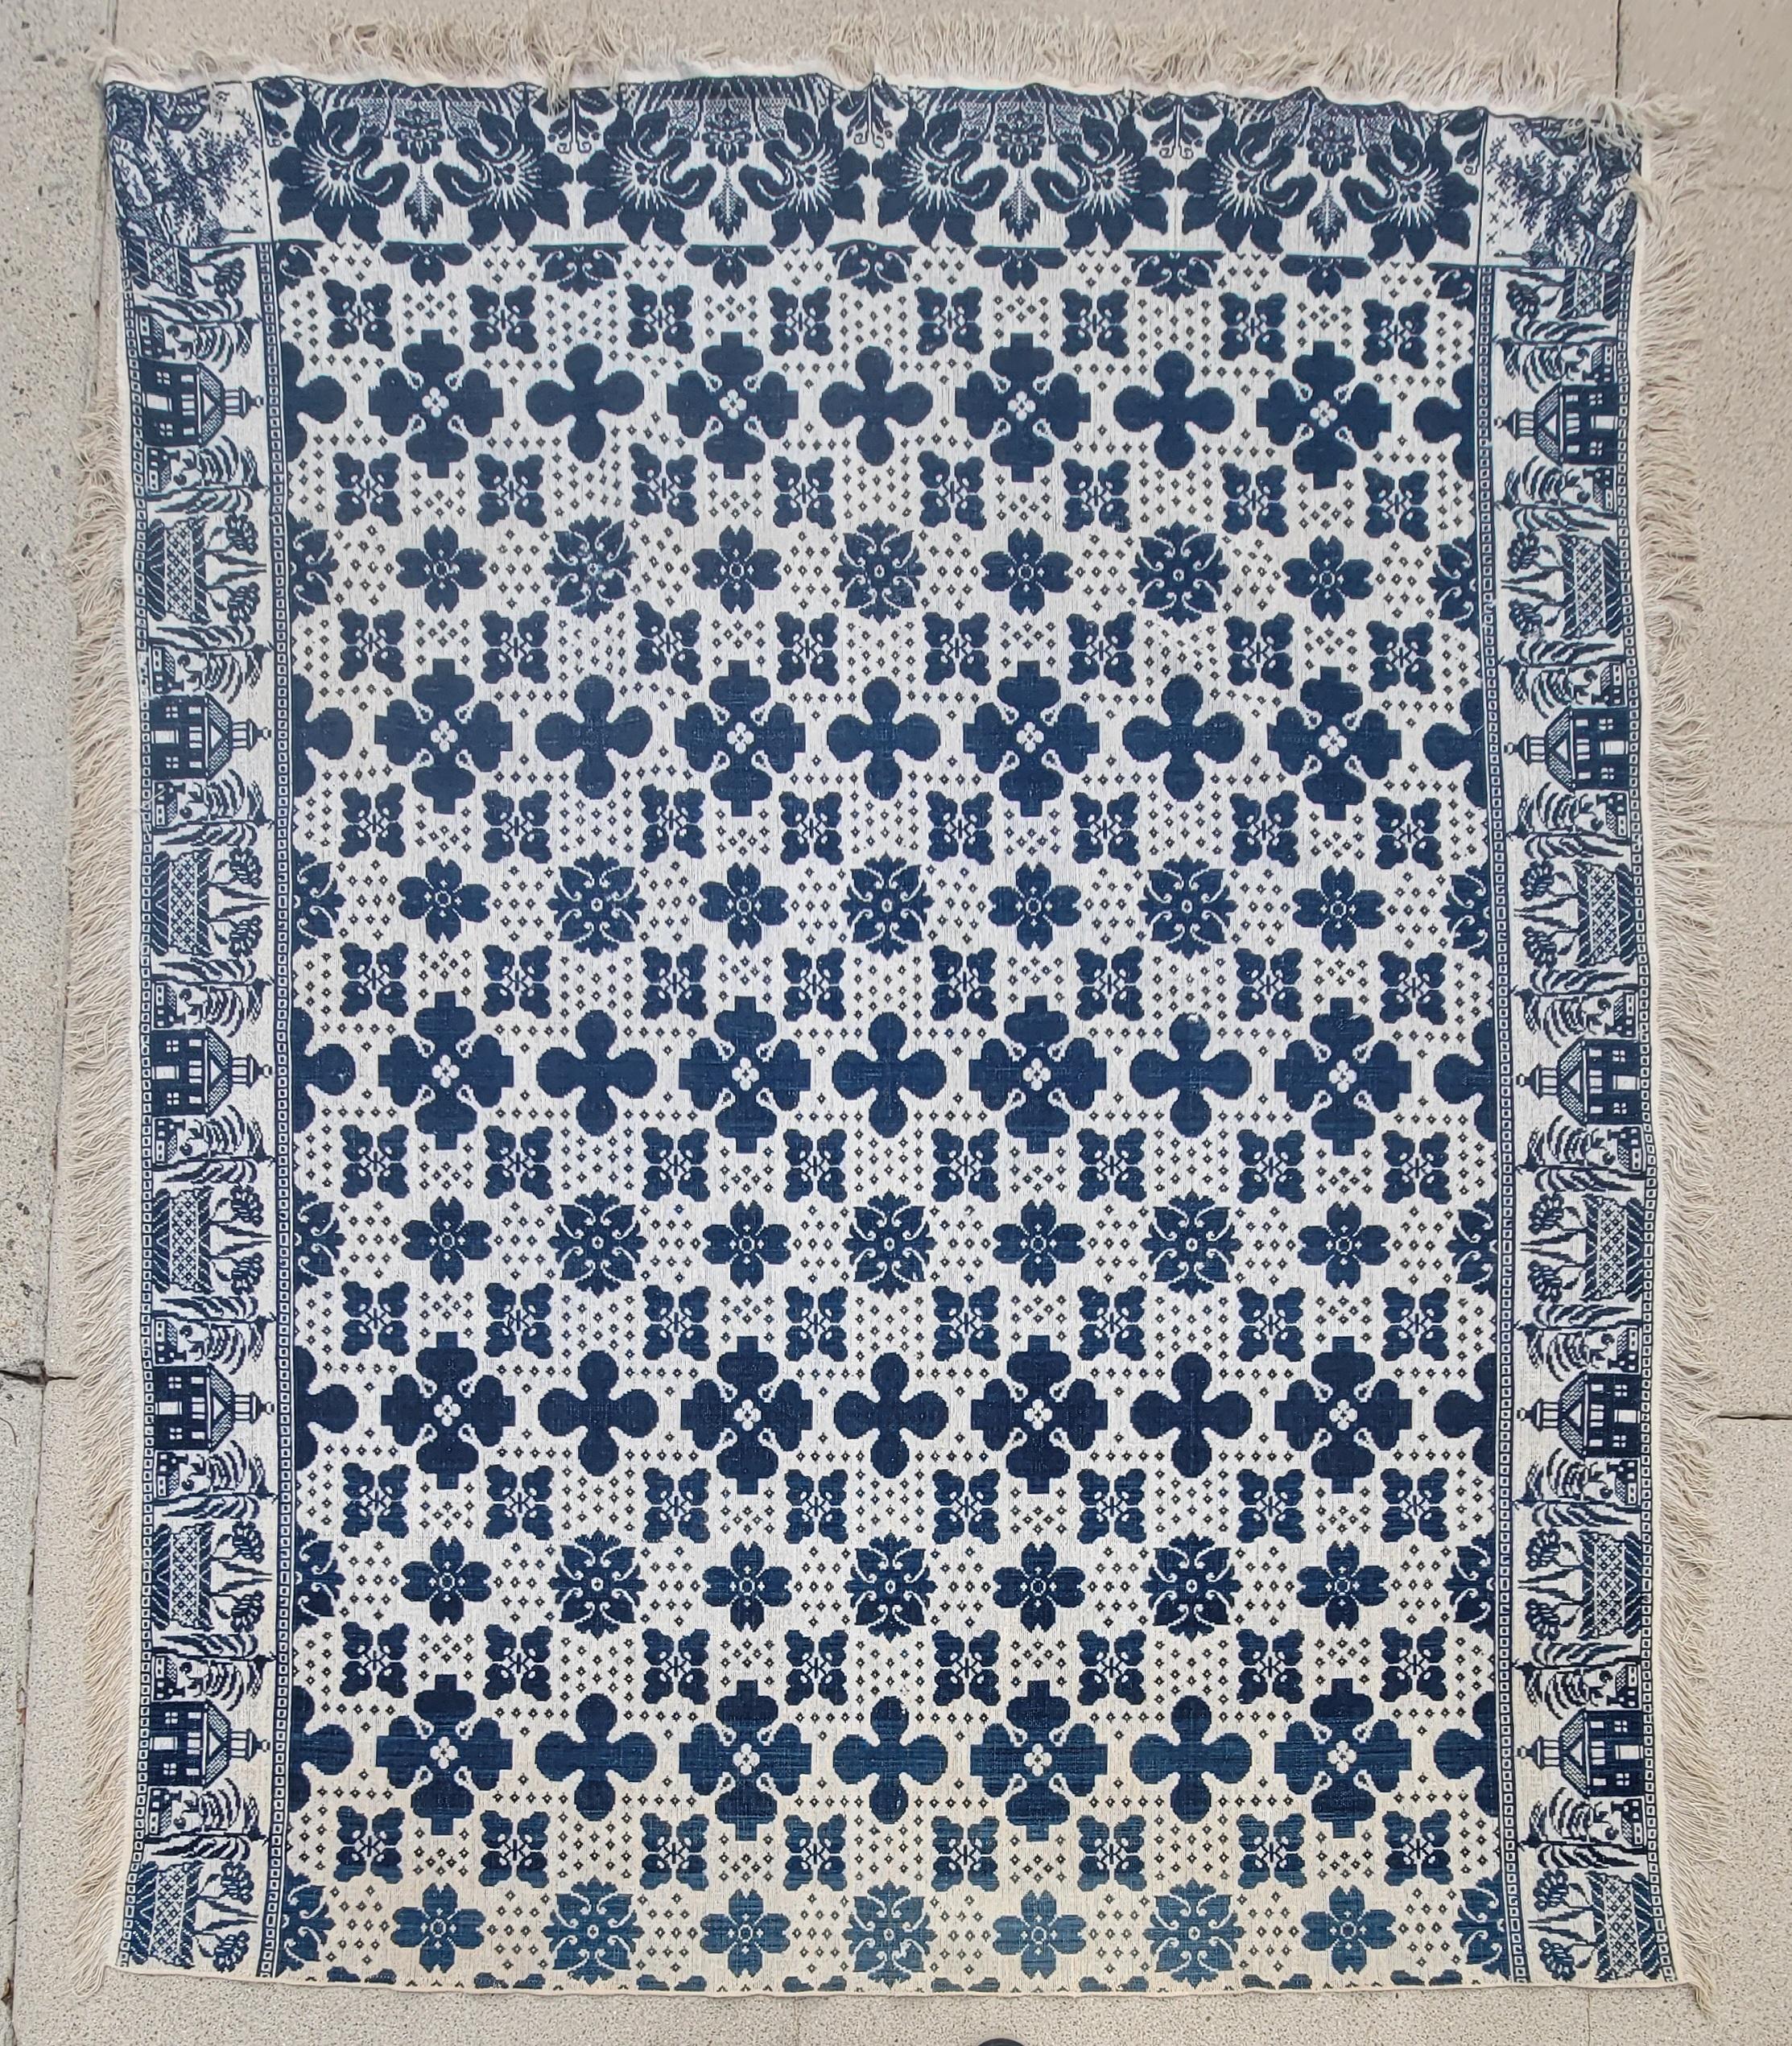 19Thc Hand woven double weave coverlet from 1840-1850. Christian & heathen pattern.This coverlet was found in Ohio.